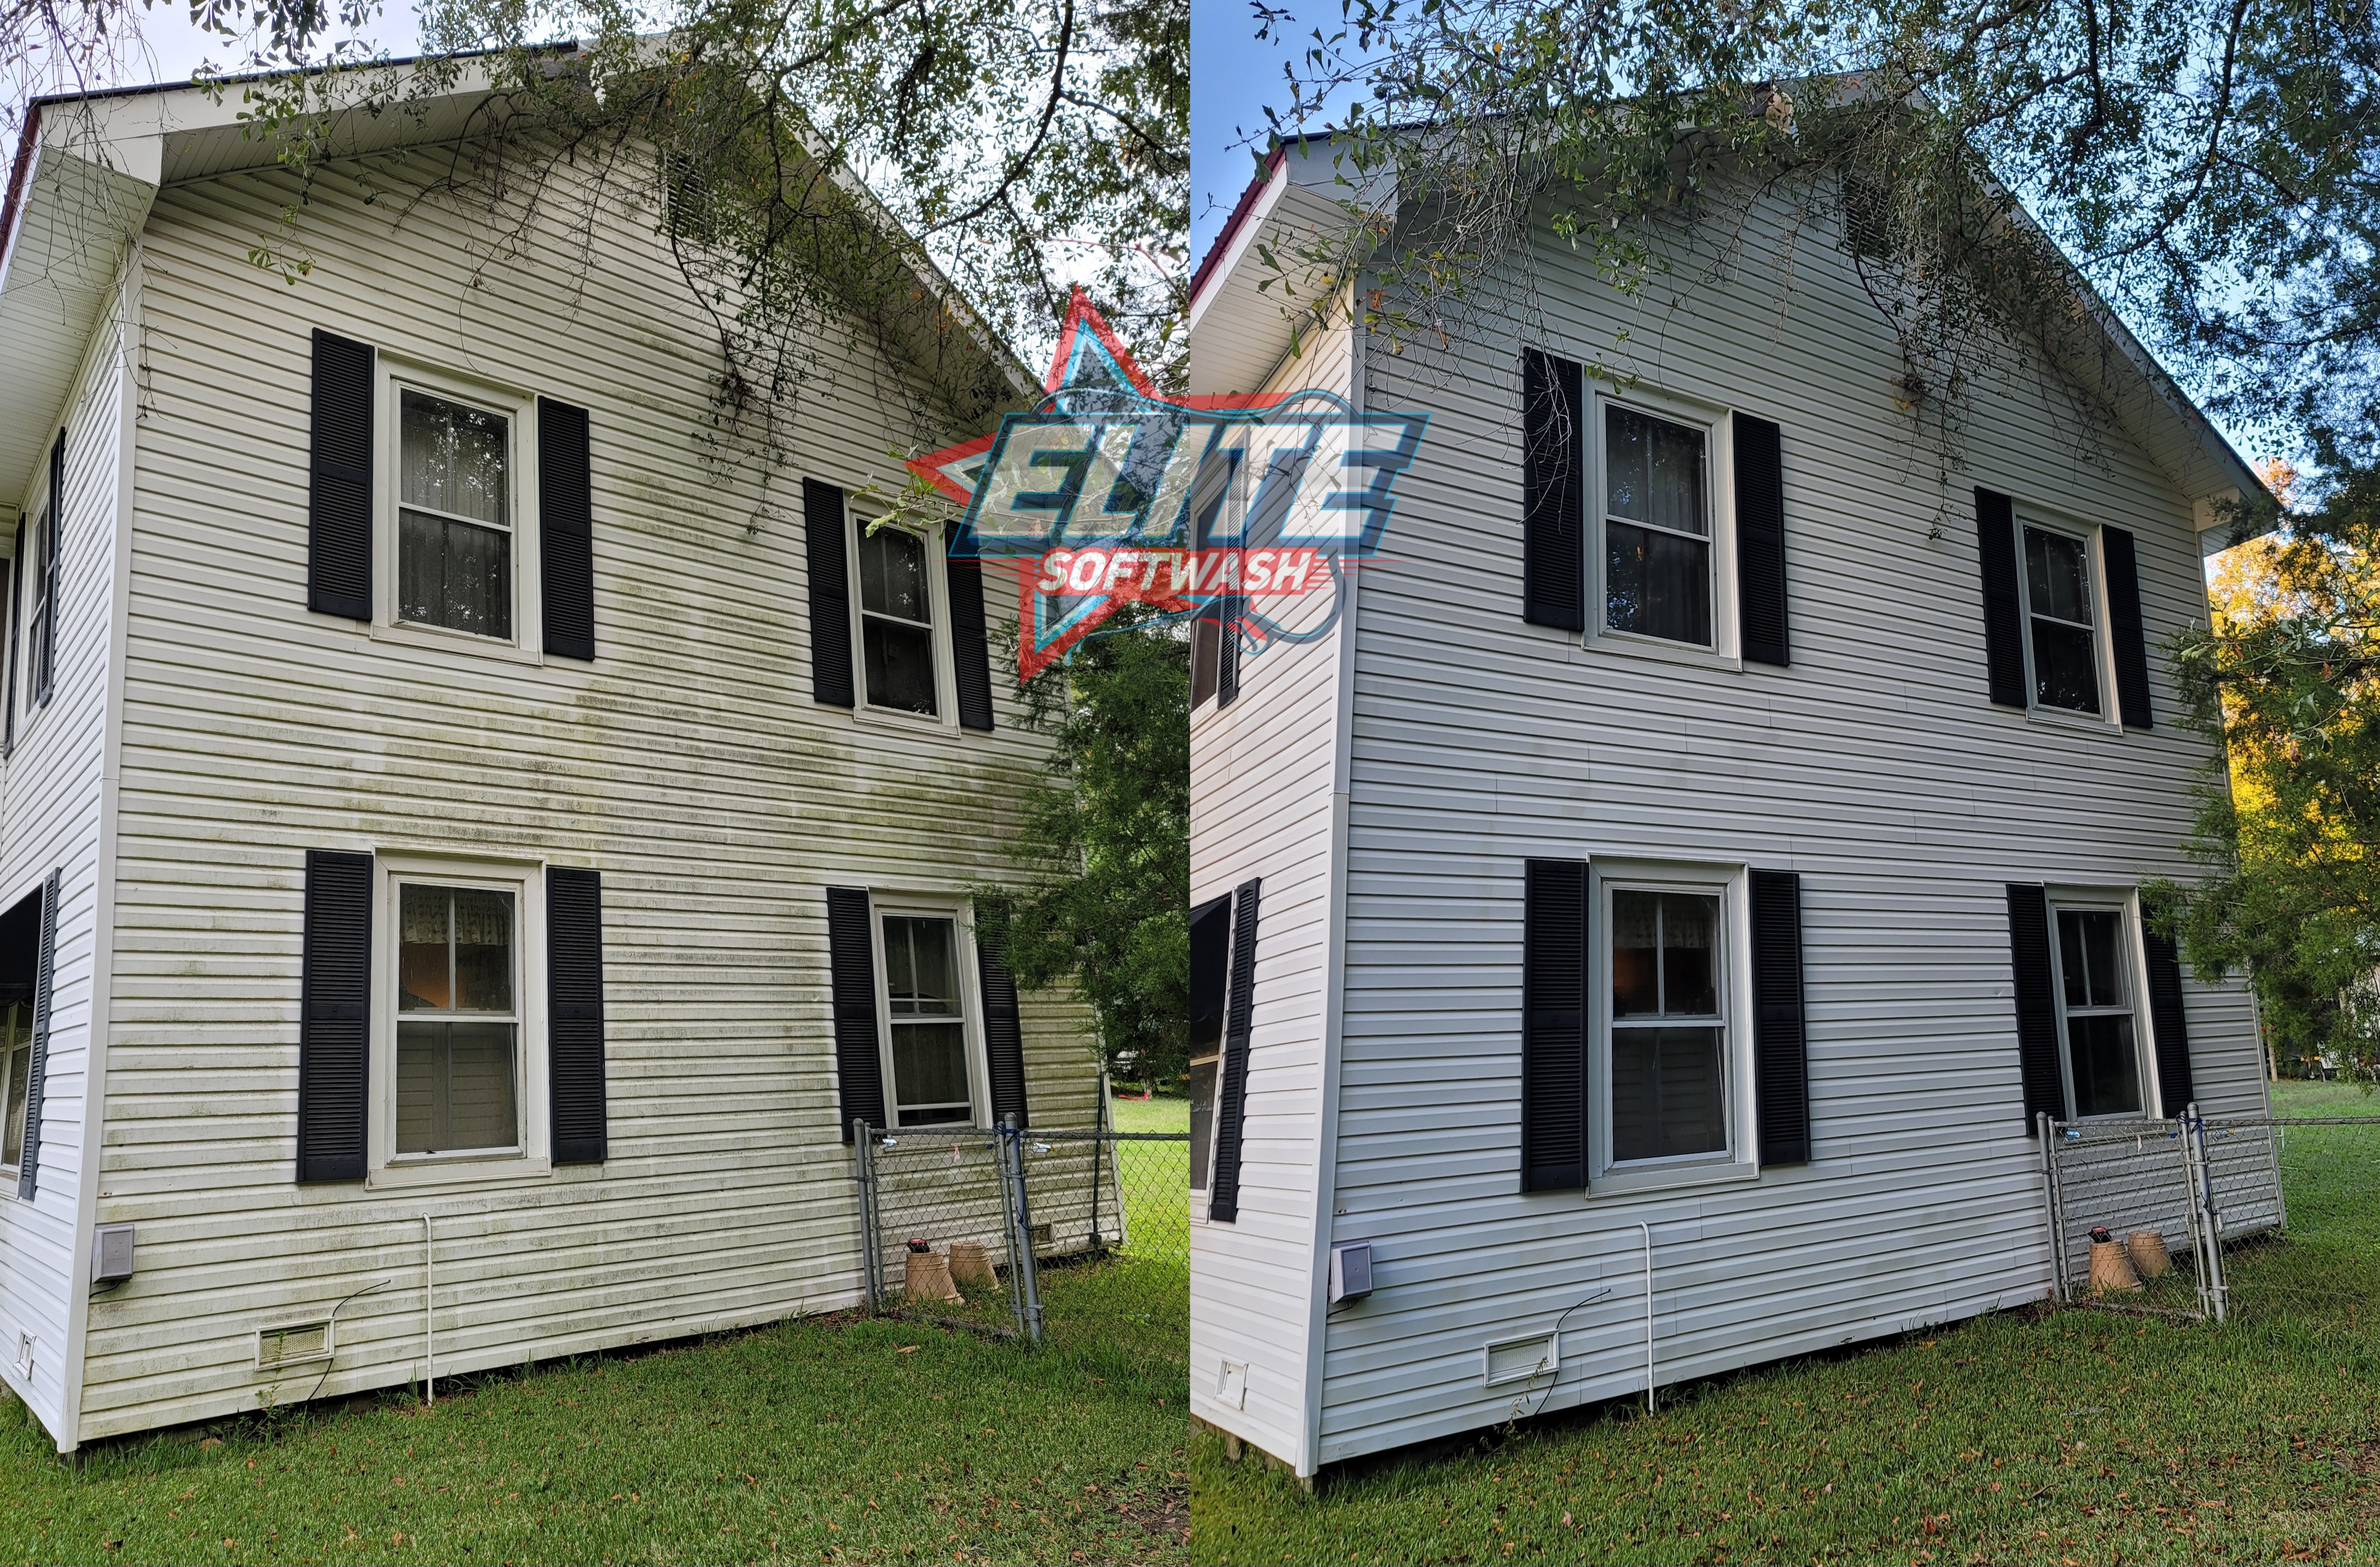 Top Quality Exterior Softwashing and Pressure Cleaning Performed in Moncks Corner South Carolina!